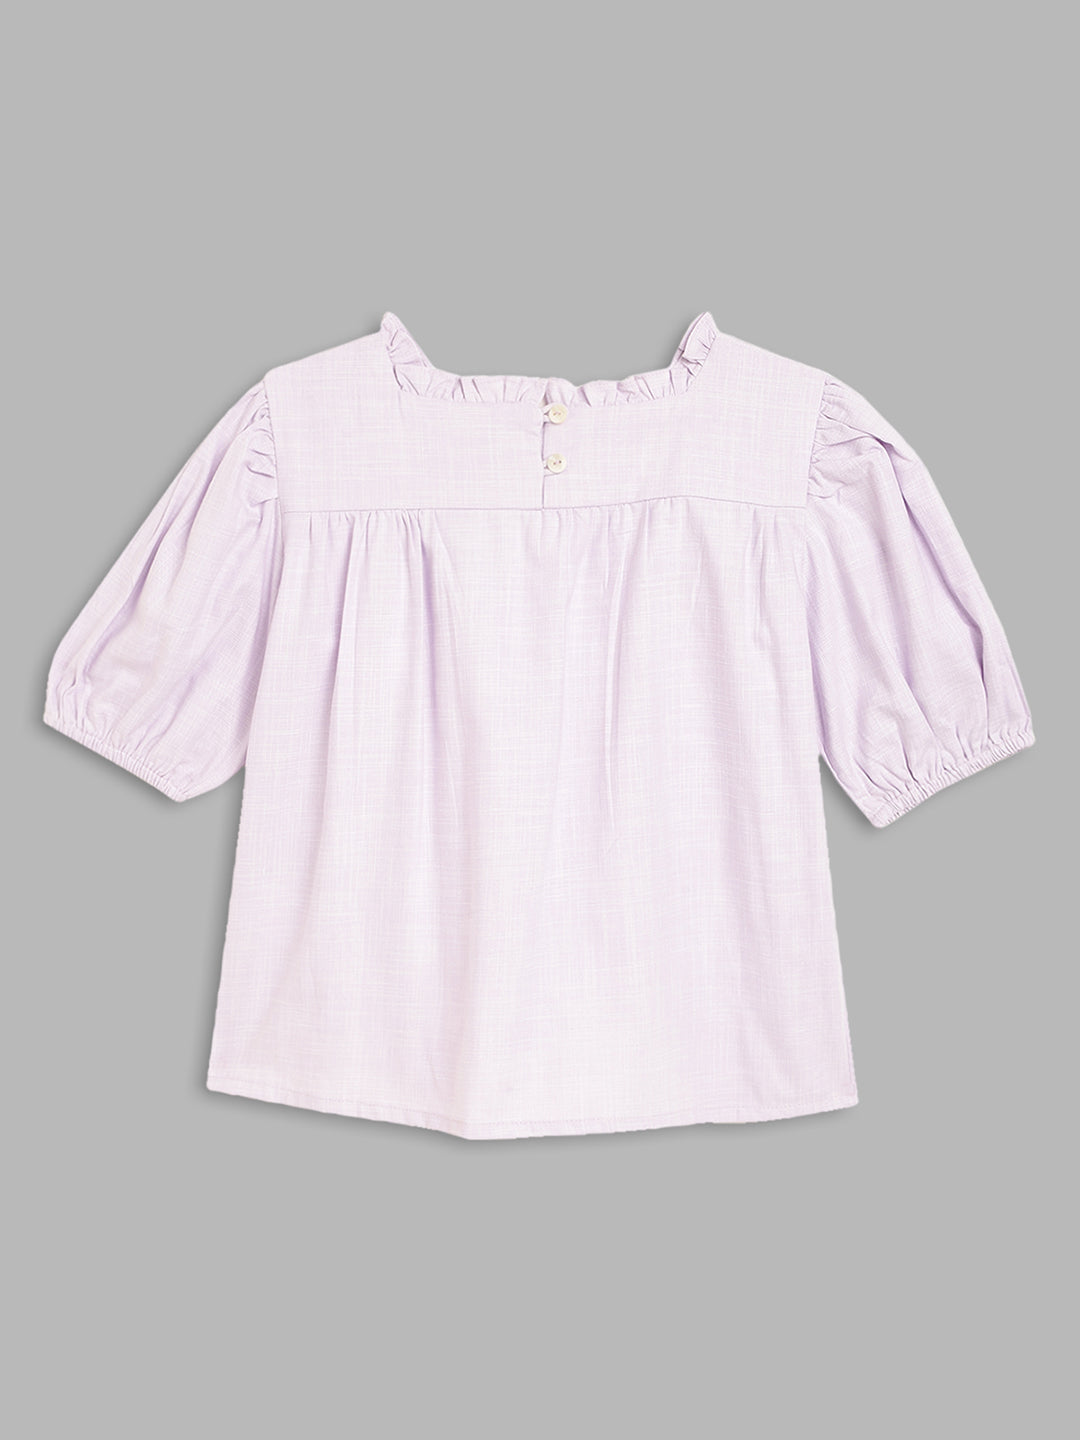 Blue Giraffe Girls Lilac Solid Square Neck Top